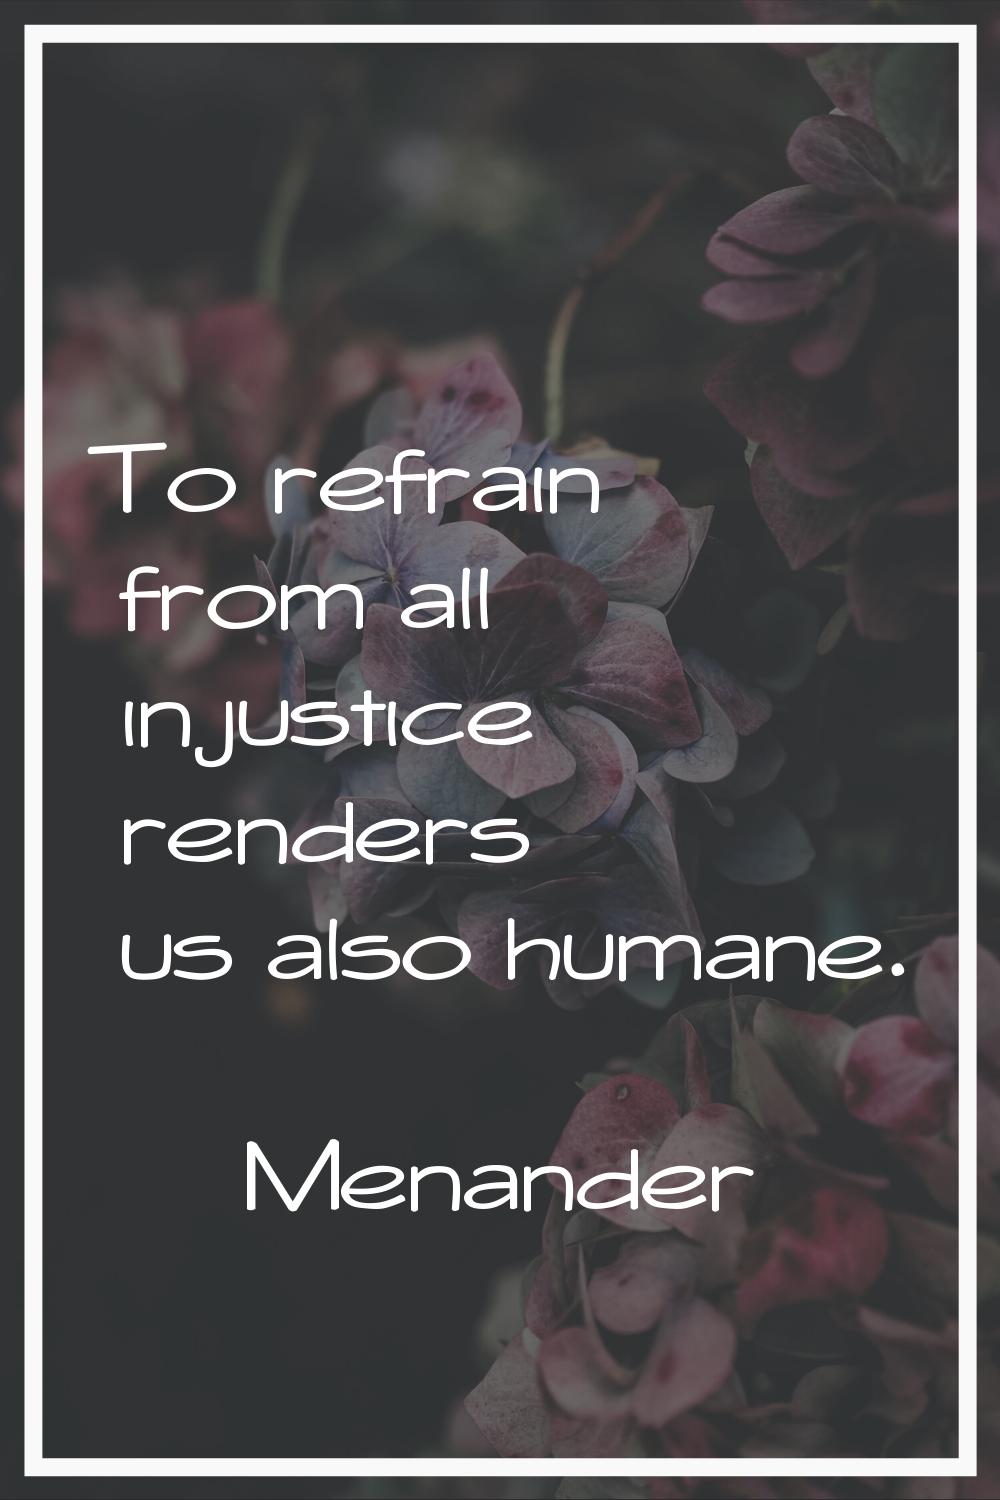 To refrain from all injustice renders us also humane.